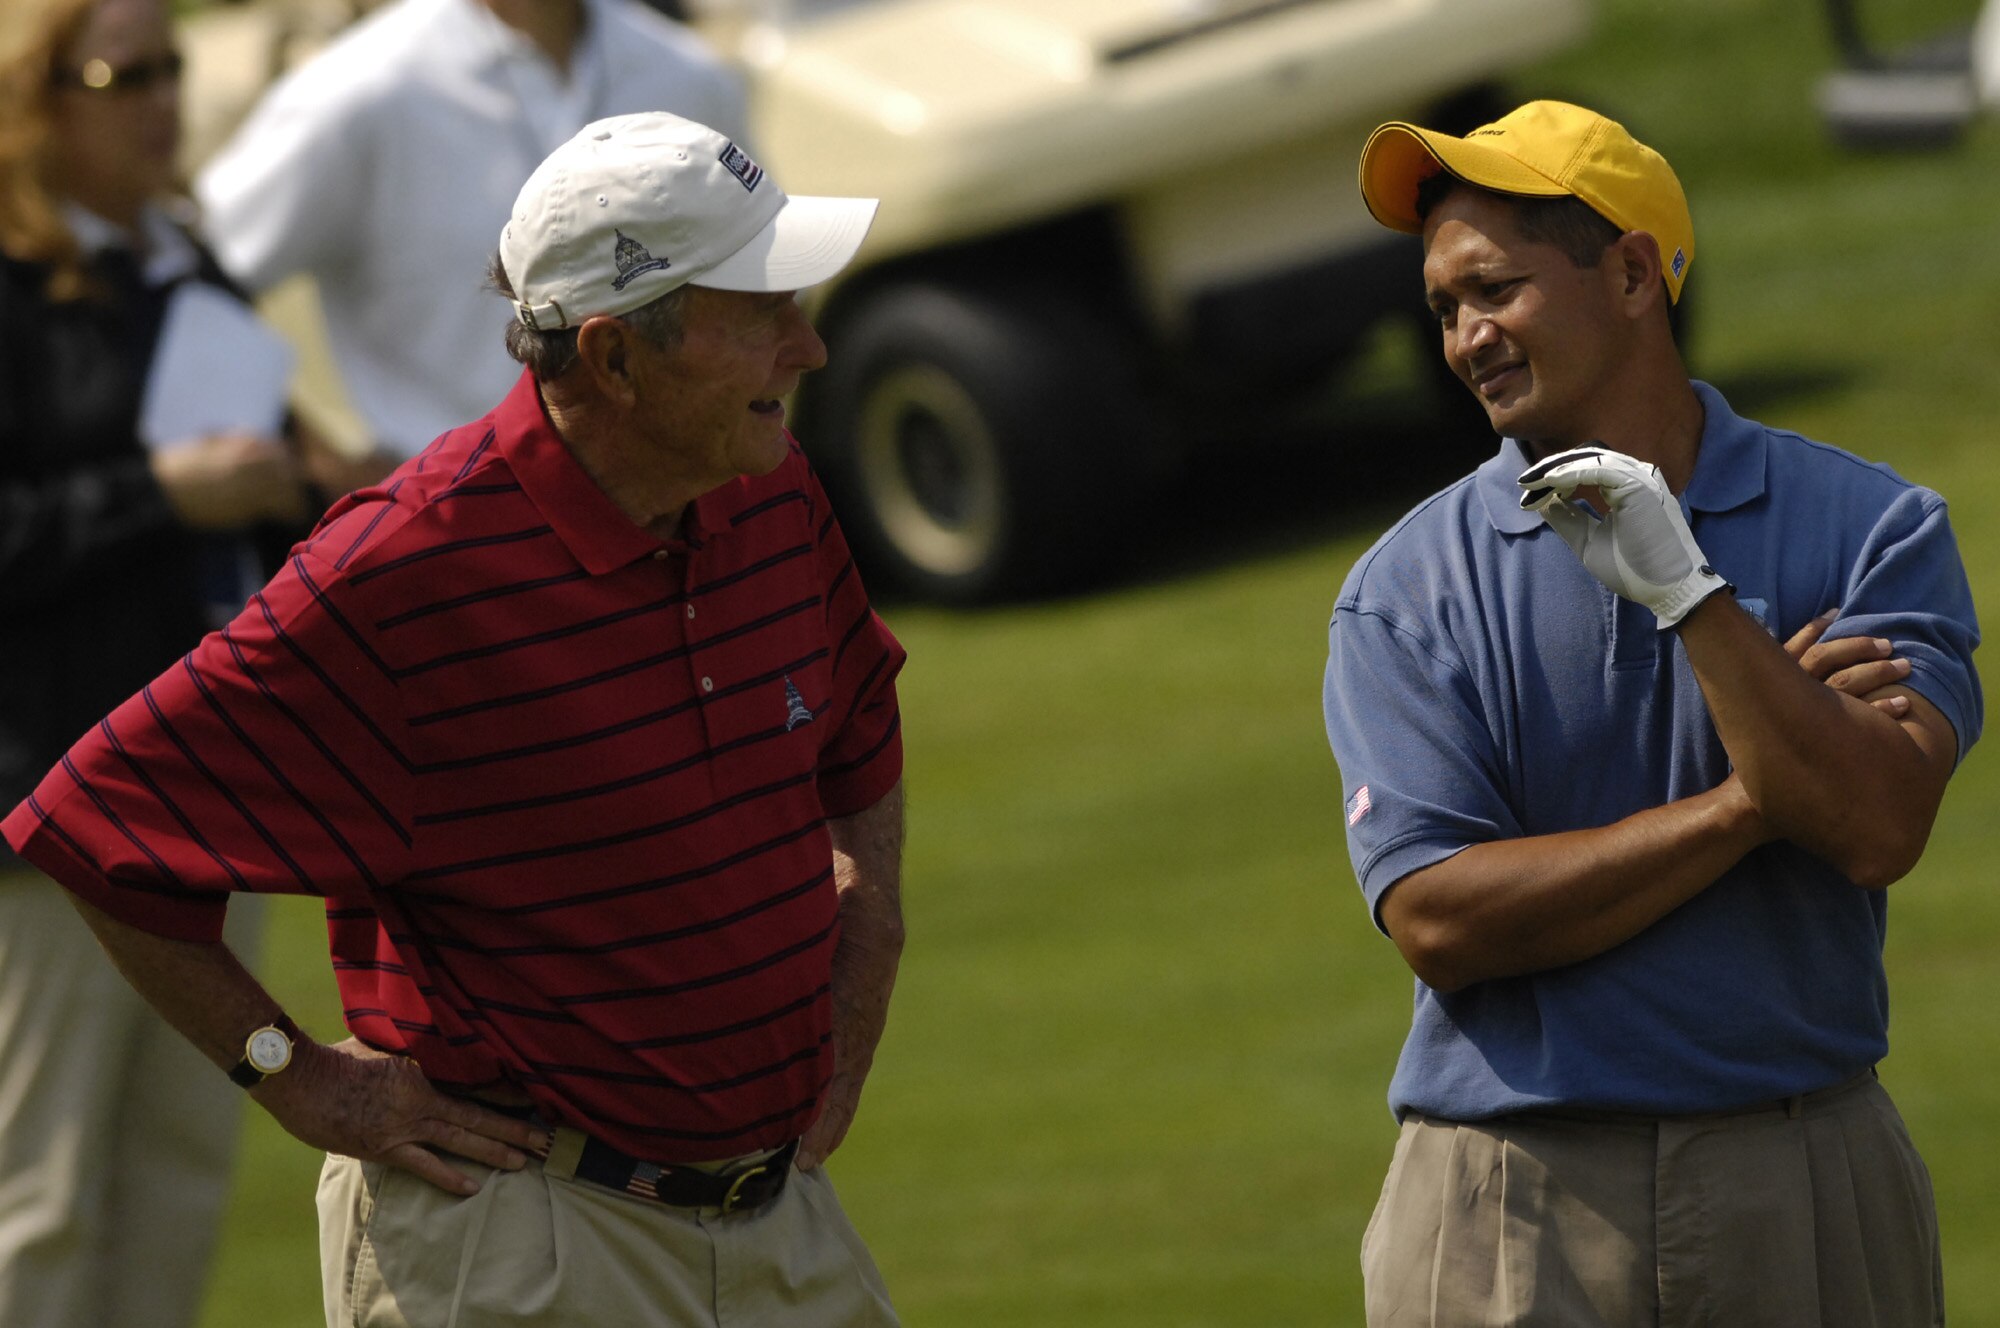 Tech. Sgt. Andy Amor, 316th Civil Engineer Squadron, Andrews Air Force Base, Md., walks down a fairway with former President George H.W. Bush at Congressional Country Club in Bethesda, Md., July 4. Sergeant Amor was selected to represent the Air Force and play with Tiger Woods at a pro-am event before the start of the AT&T National Golf Tournament at Congressional. Tiger Woods was the event host as well as a contestant and spokesman. (U.S. Air Force photo by Senior Airman Dan DeCook)